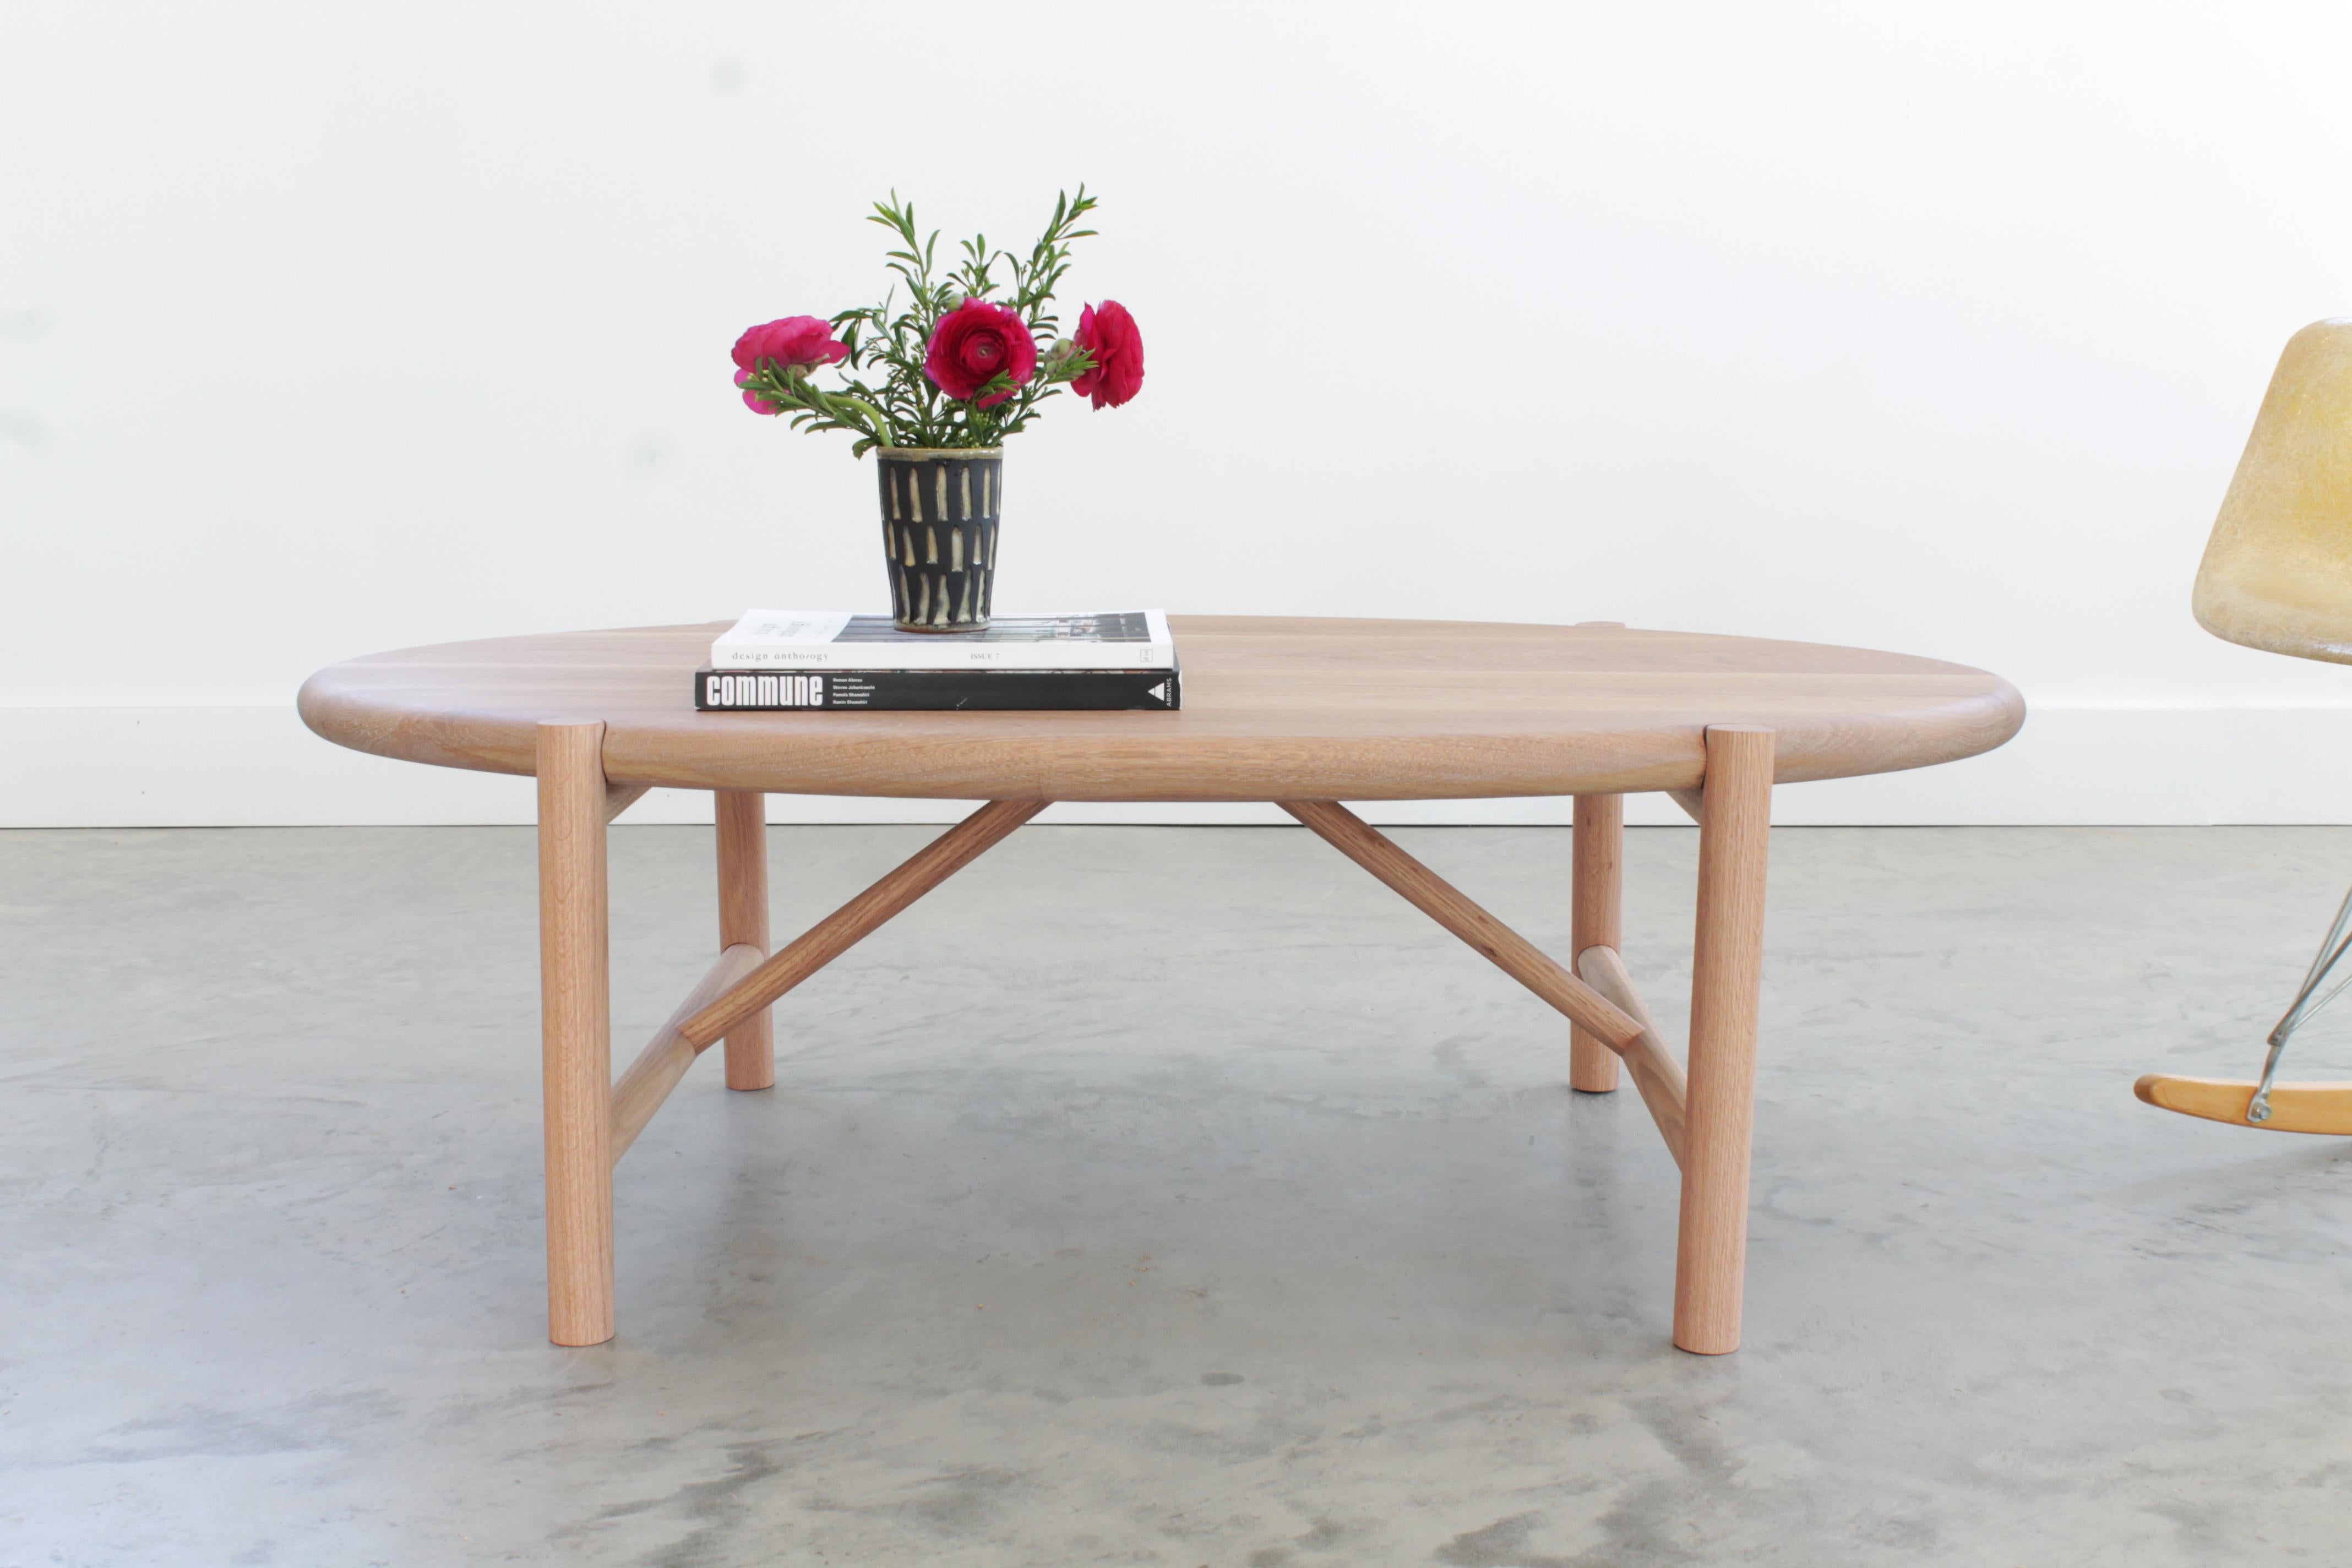 The Mora coffee table easily adapts to the styling of any room with classic joinery and soft lines. It has a solid wood top and mortise and tenon leg structure to give it stability and durability for residential and commercial use.